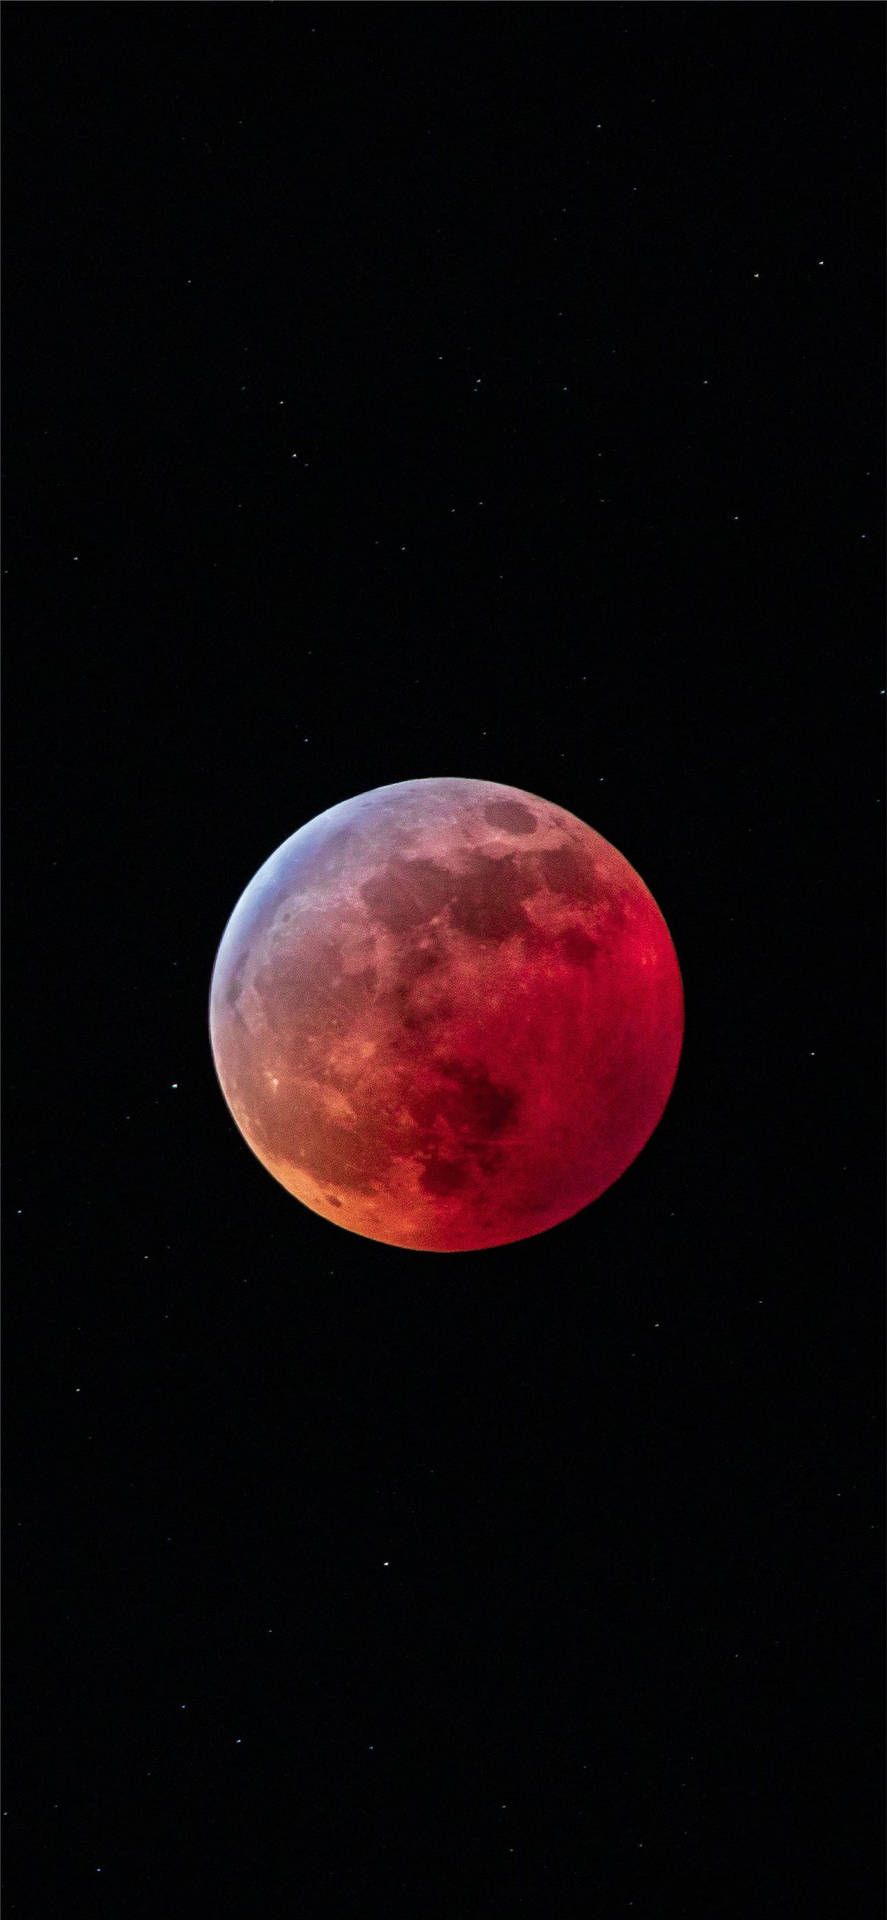 IPhone wallpaper of a red moon in the night sky - Moon